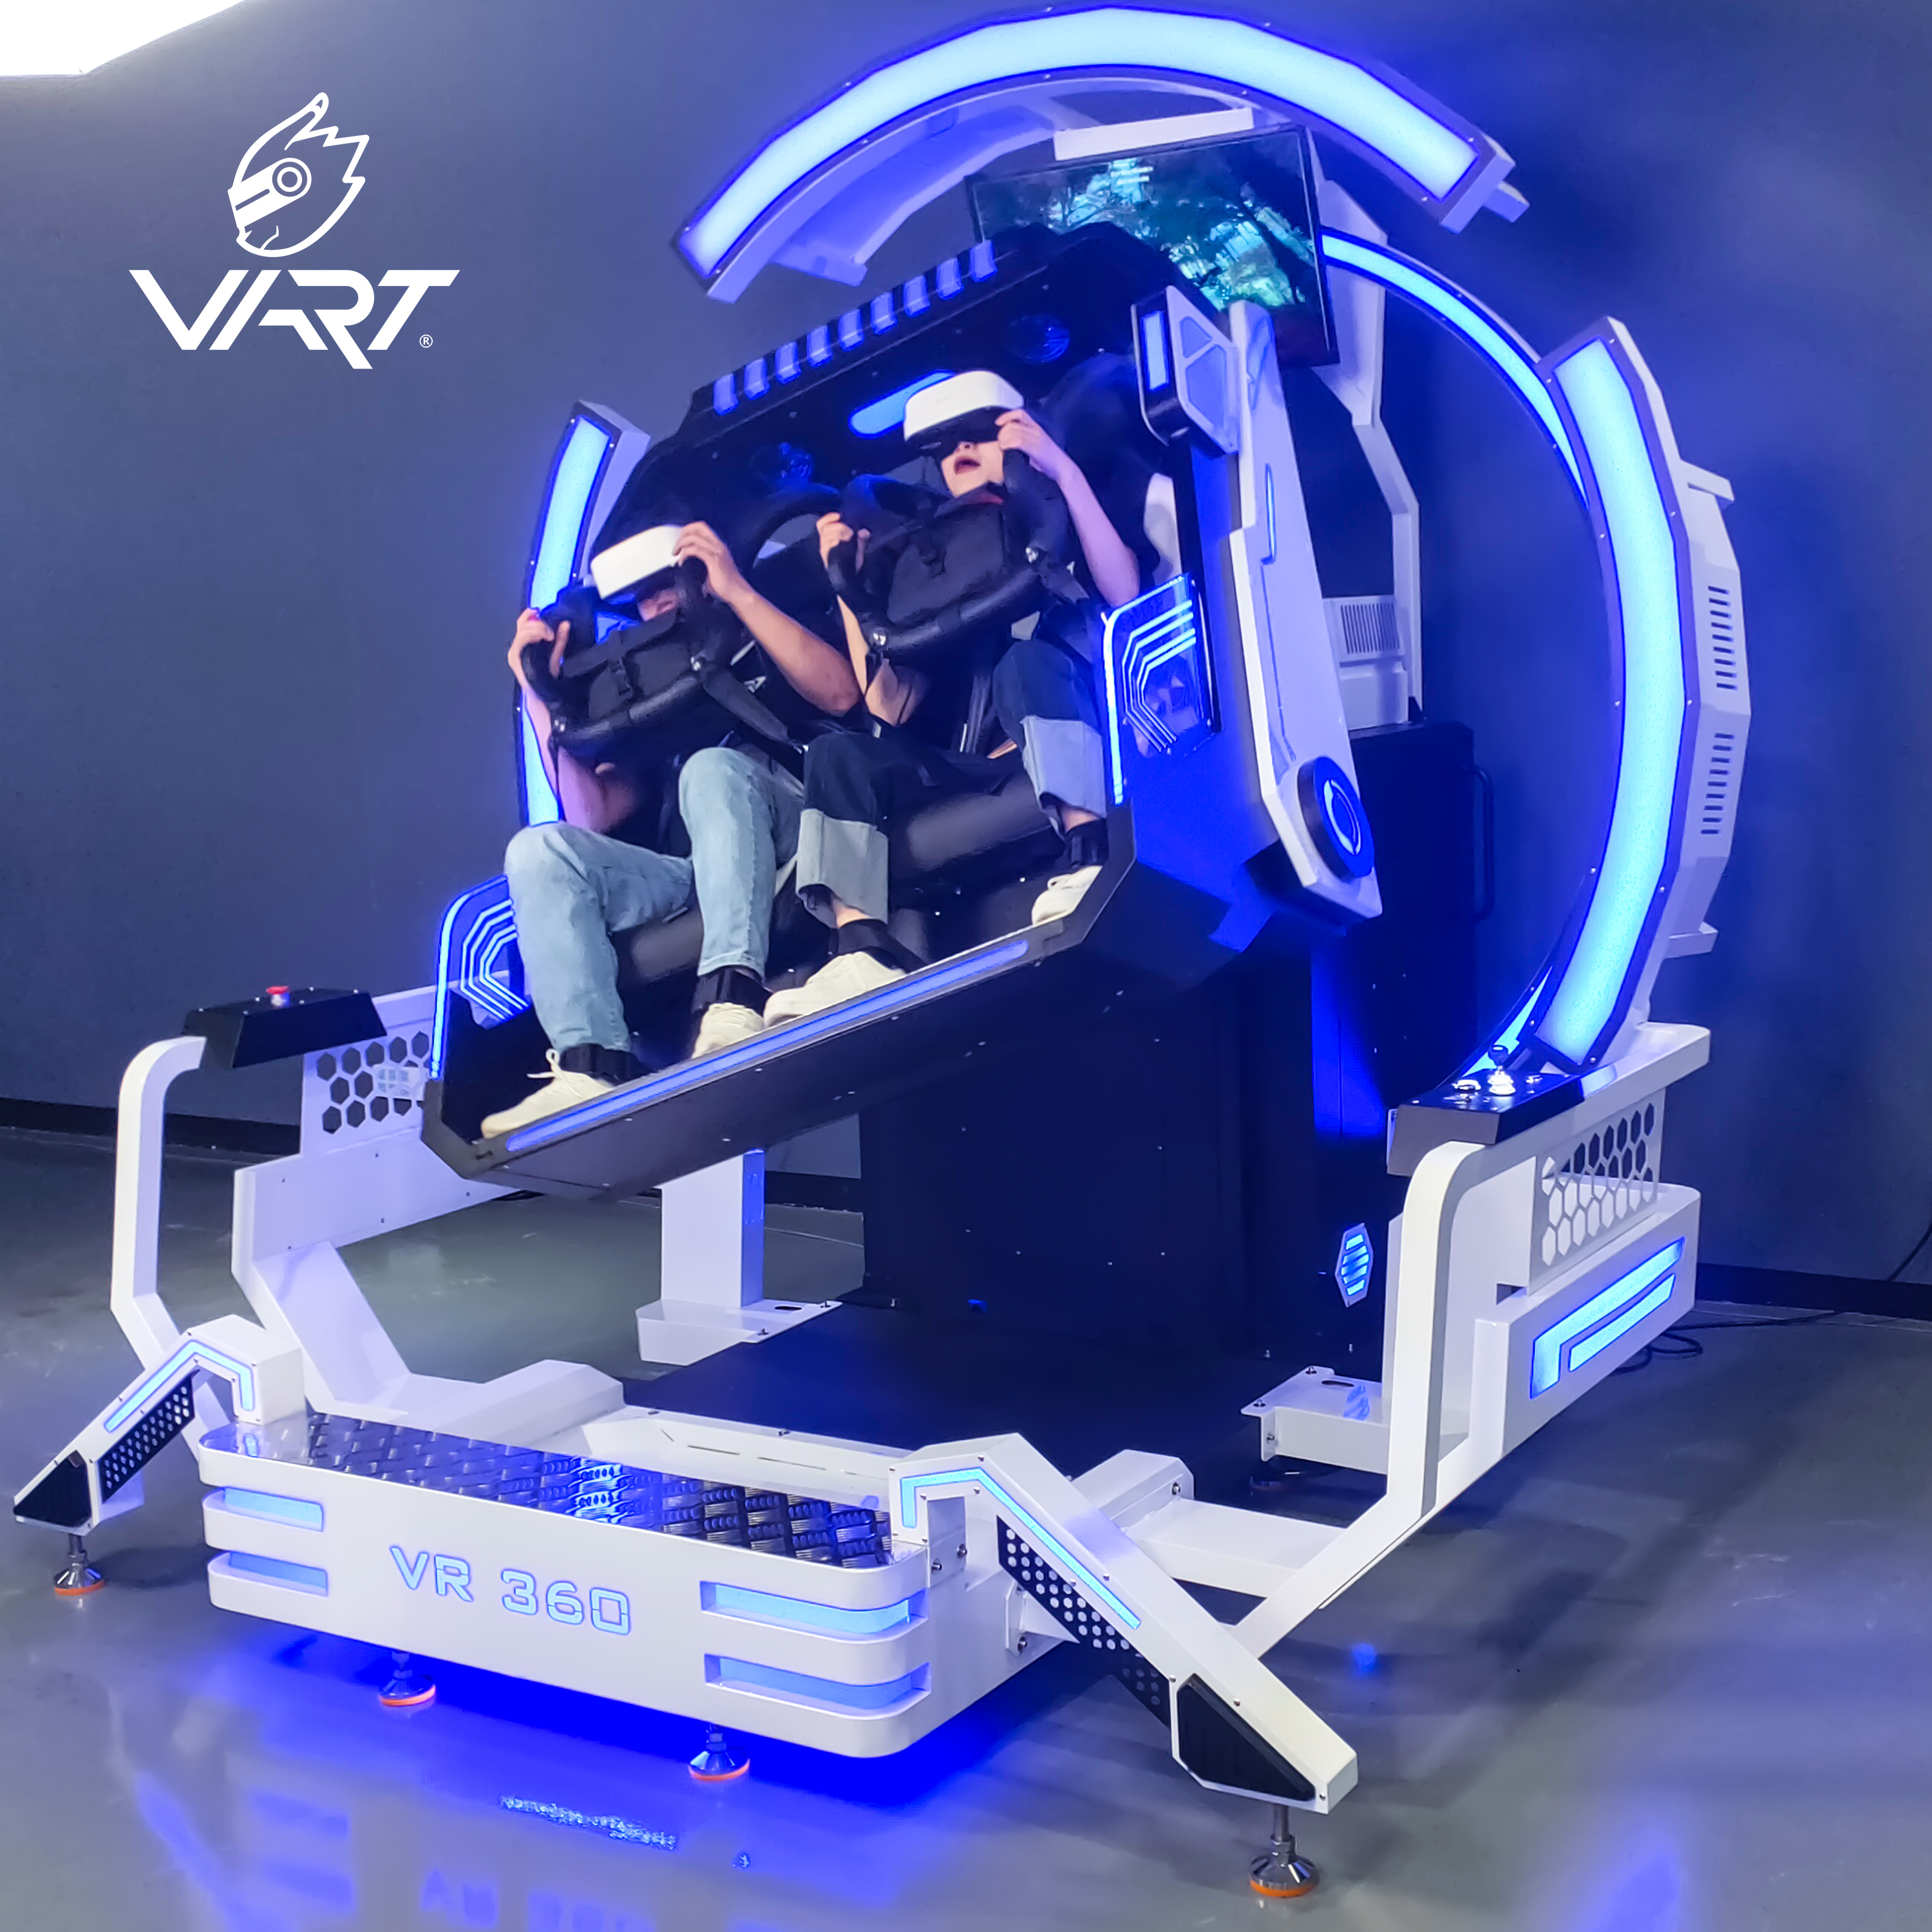 Low price for 9d Vr 360 Degree Headtracking Roller Coaster Simulator Plus Virtual Reality Vibration 9d Cinema